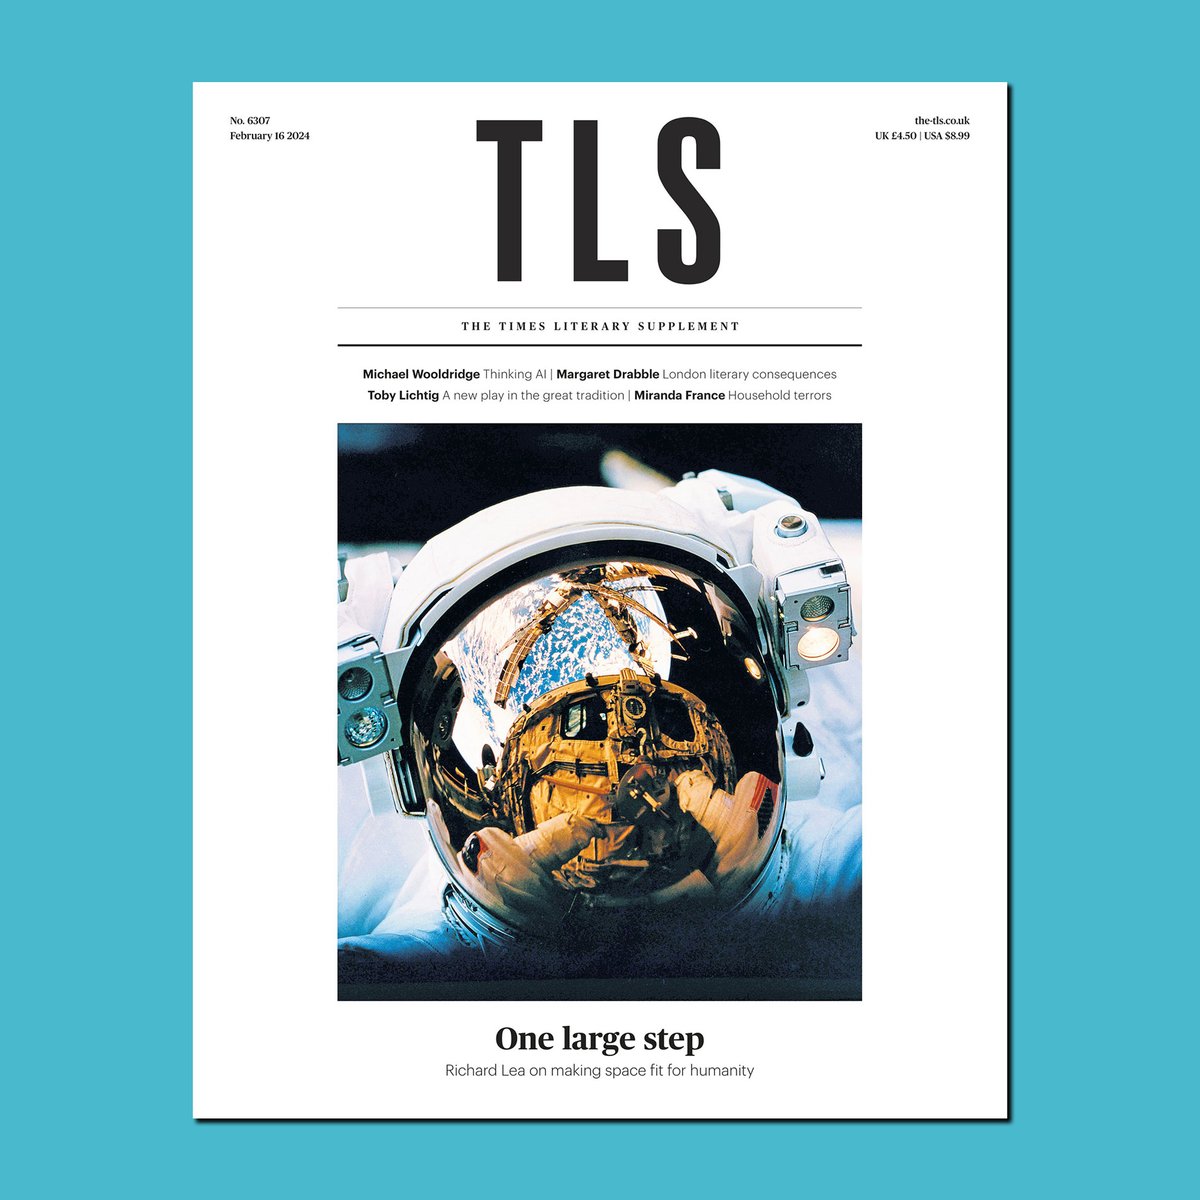 This week’s @TheTLS, featuring @richardlea on space; @wooldridgemike on AI; Margaret Drabble on London Consequences; @MirandaFrance1 on Lara Pawson; @TobyLichtig on Till the Stars Come Down; @Ram_Guha on Churchill; @MadocCairns on the church in the US; @rinireg on meat – and more